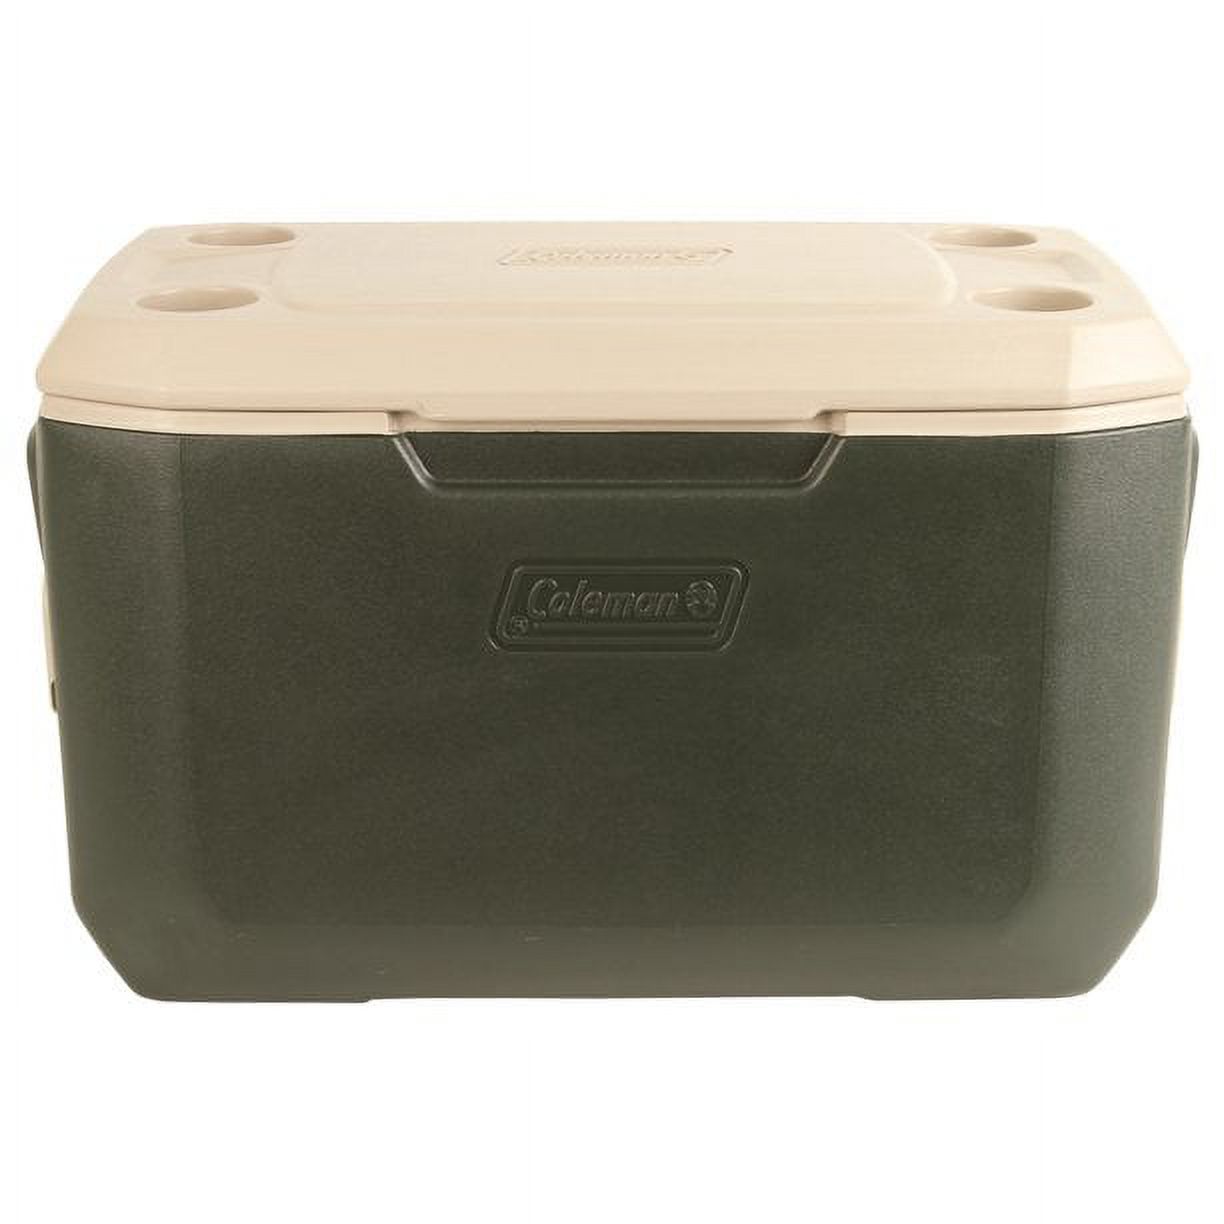 Coleman 70 Quart Xtreme 5 Day Heavy Duty Cooler, Green - image 1 of 6